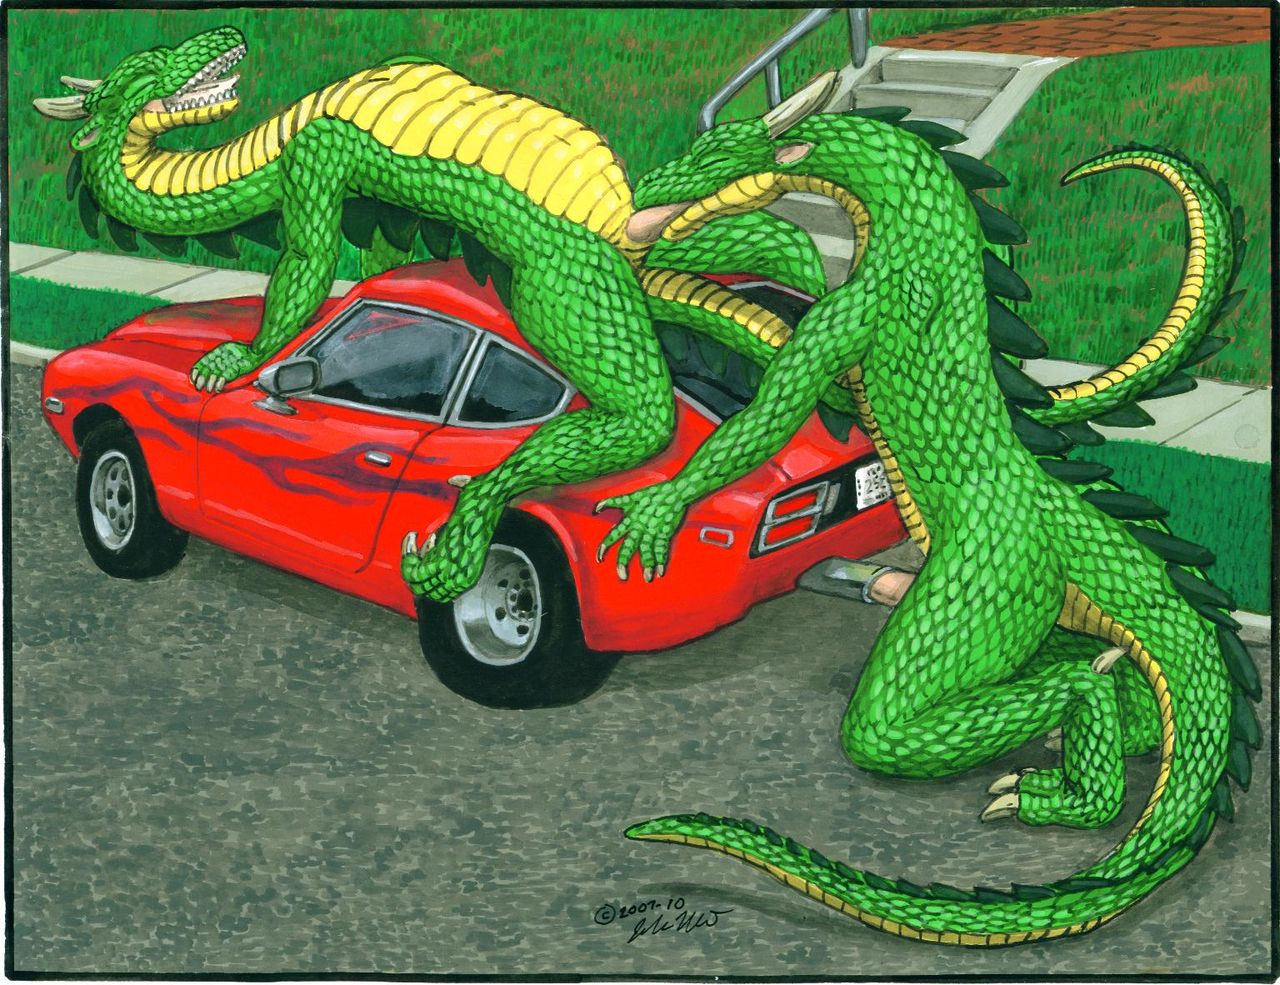 Dragons having sex with cars